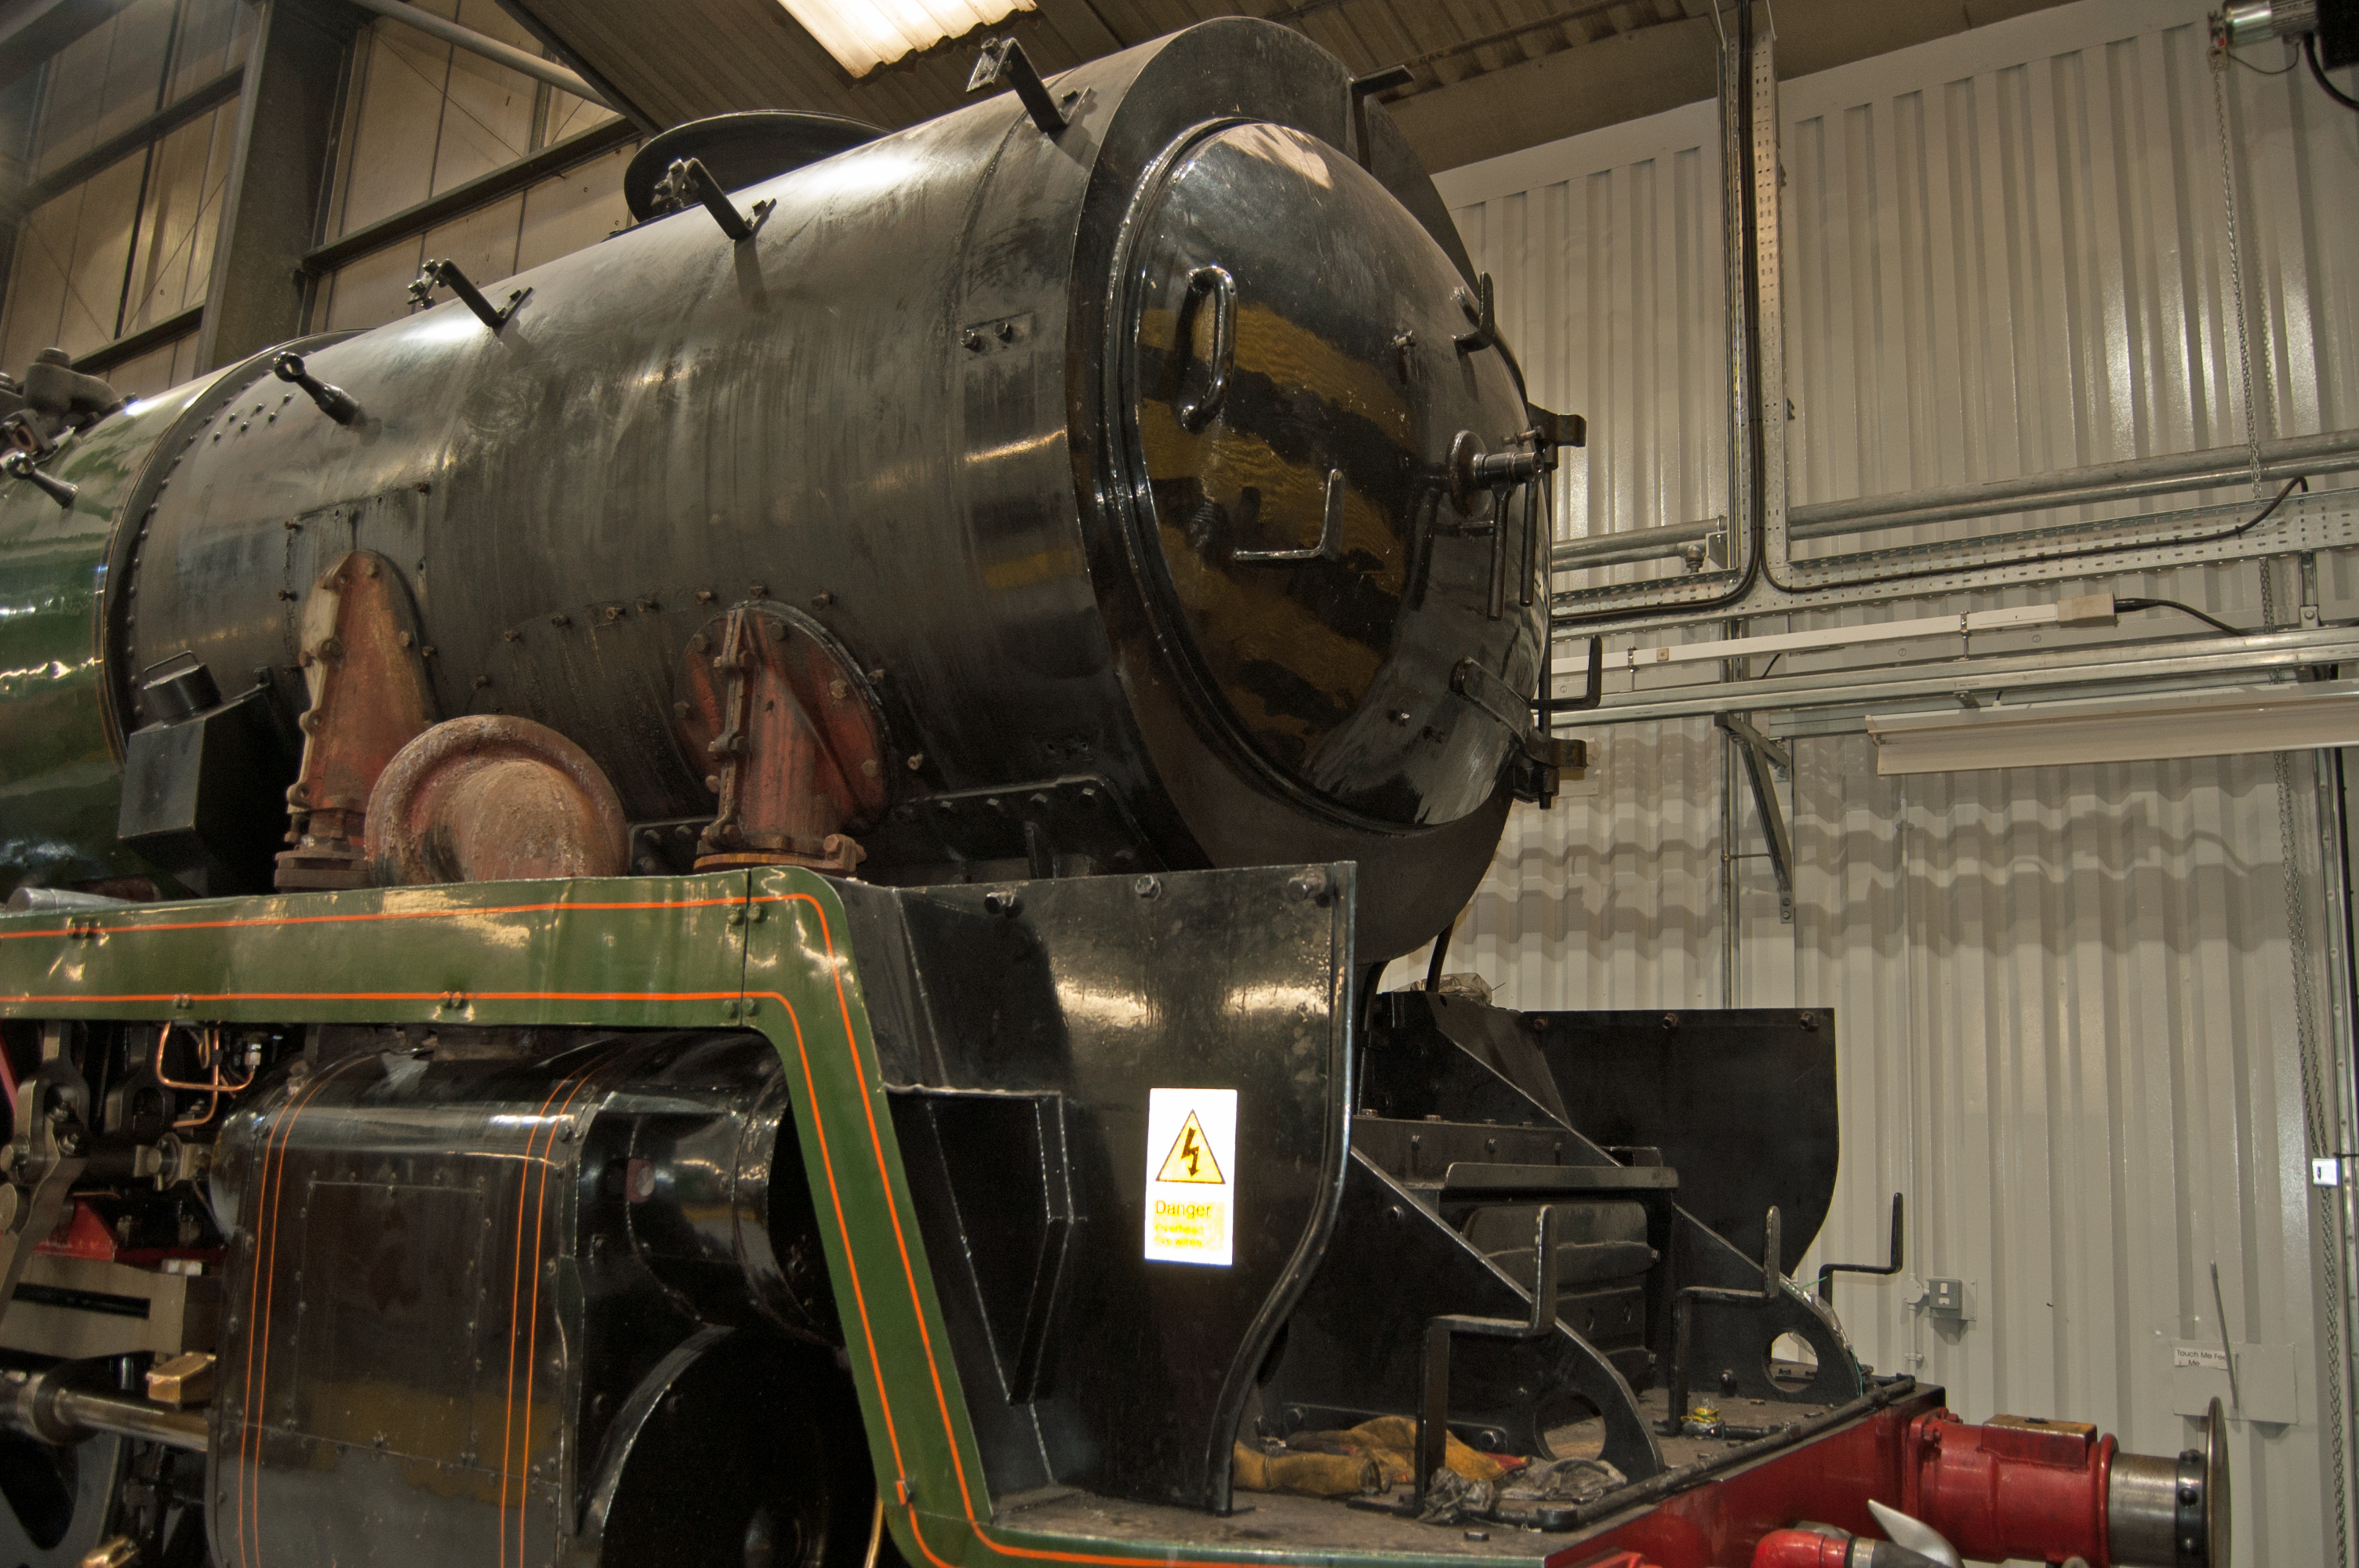 A start has been made on dismantling the front of the loco